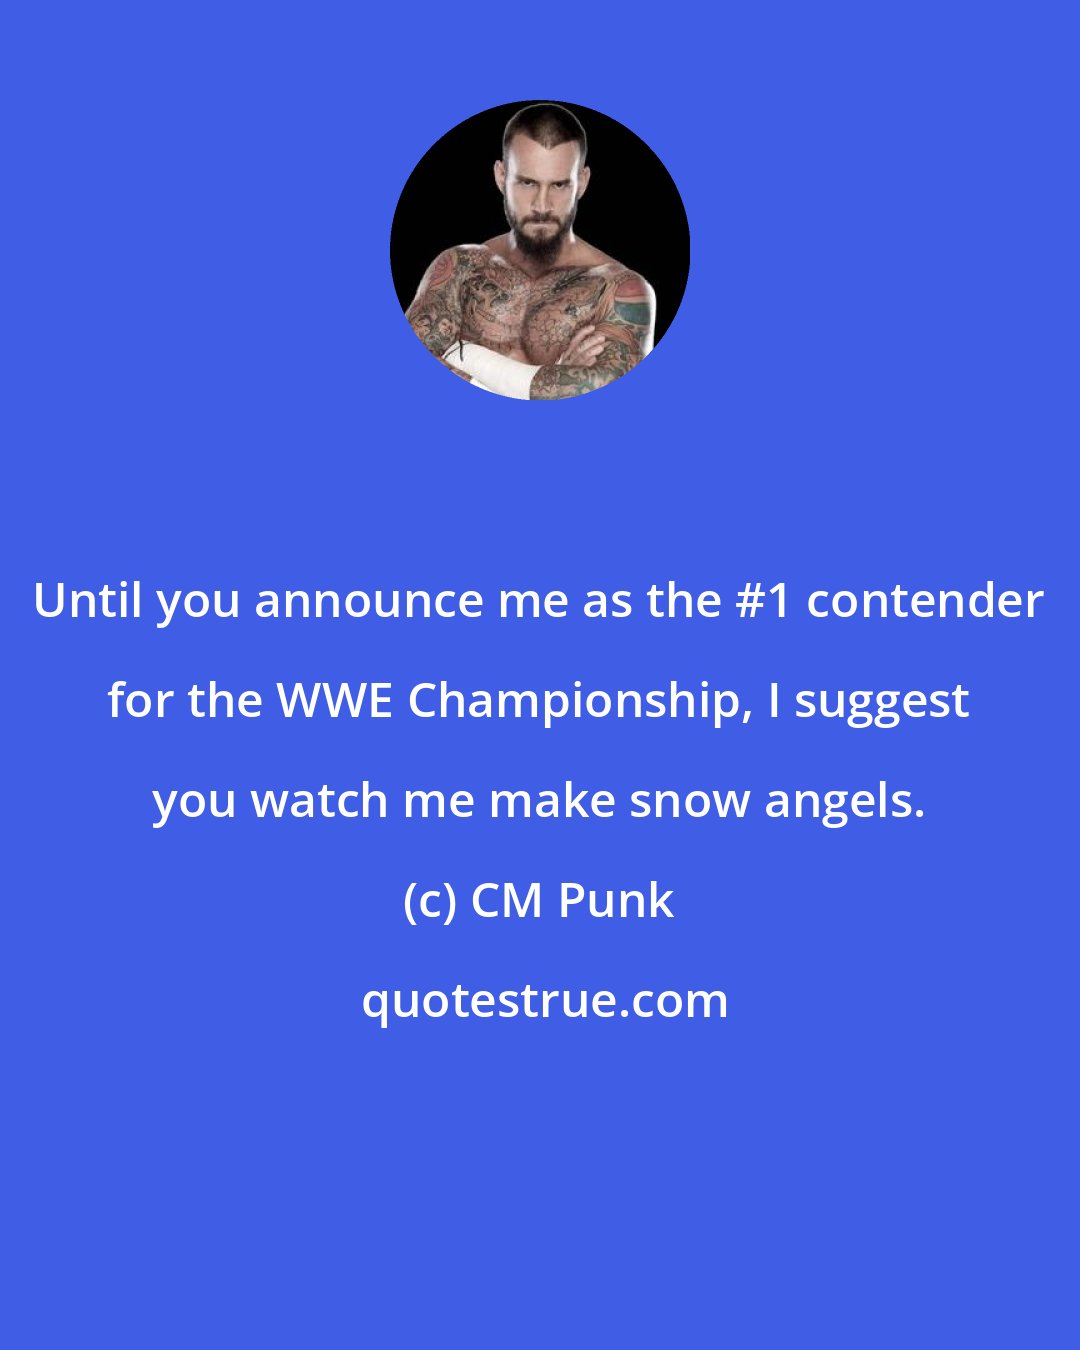 CM Punk: Until you announce me as the #1 contender for the WWE Championship, I suggest you watch me make snow angels.